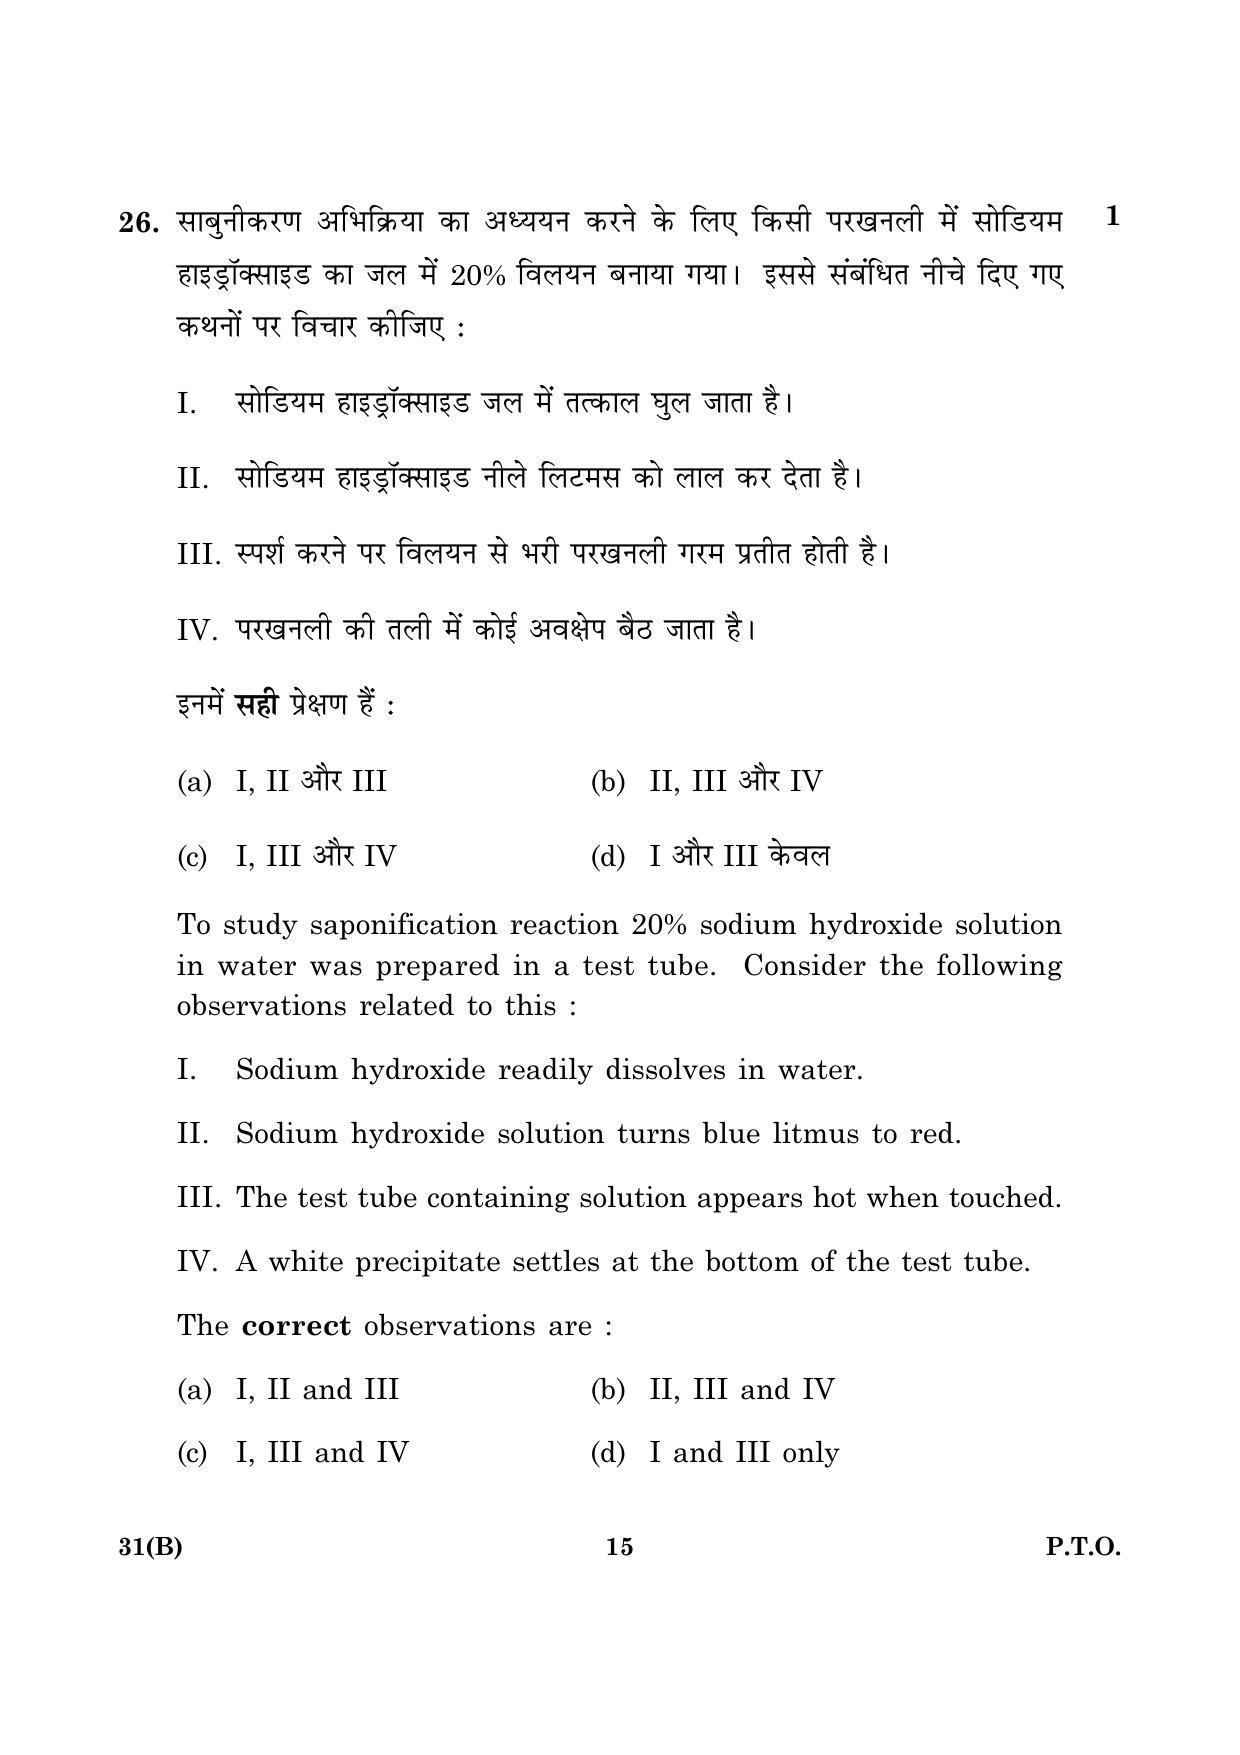 CBSE Class 10 031(B) Science 2016 Question Paper - Page 15